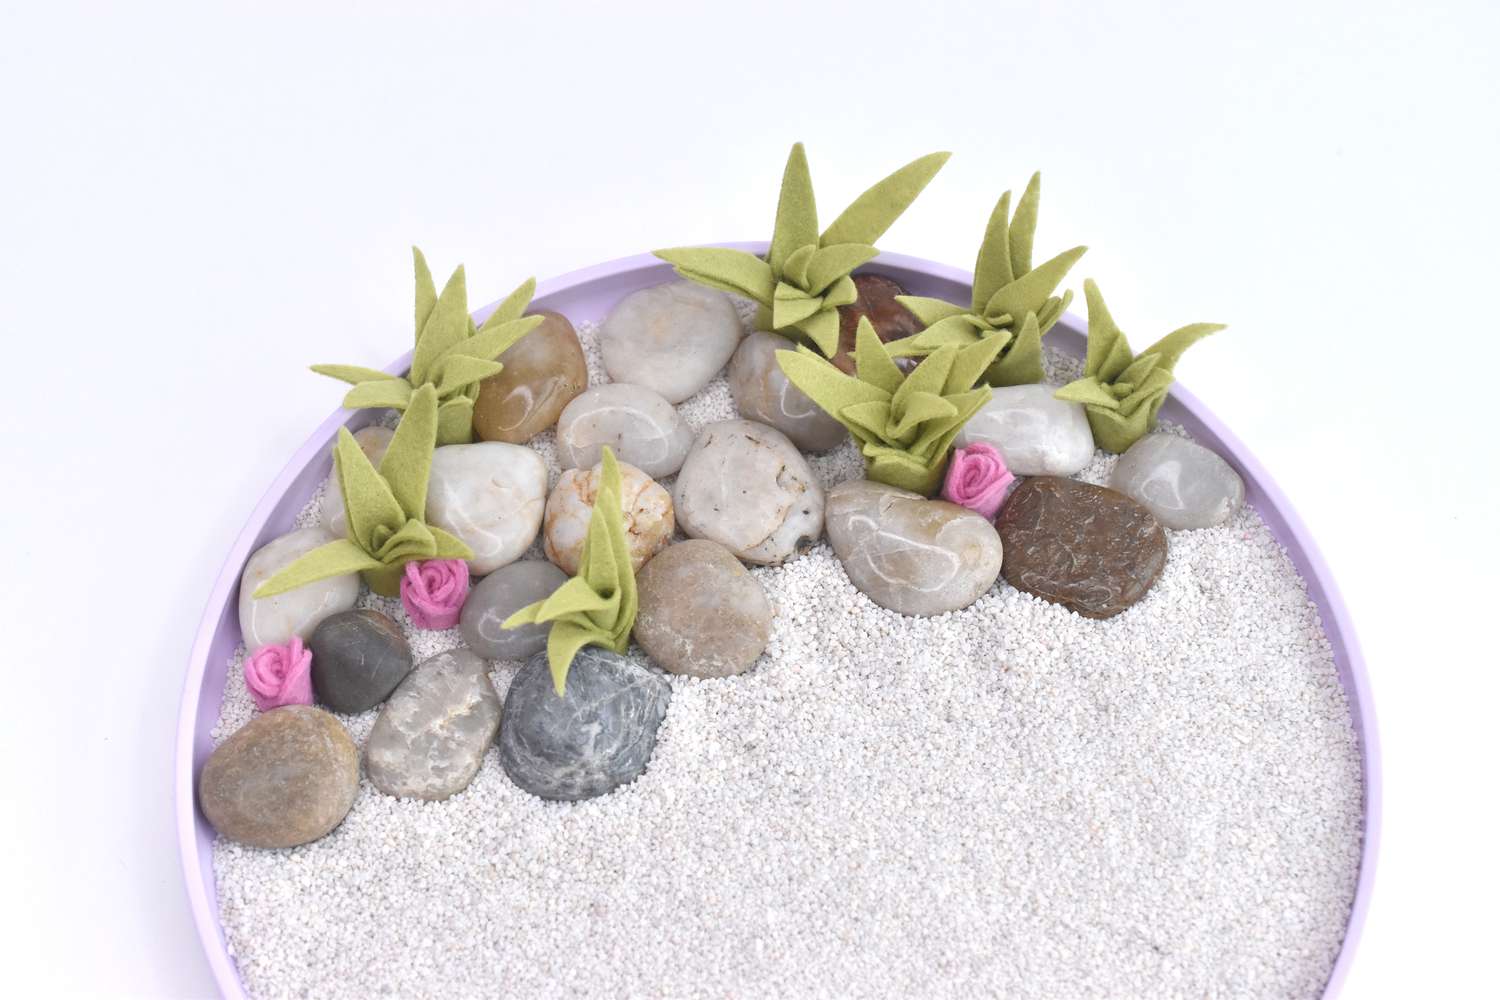 Place the Plants and Stones on One Side of the Tray